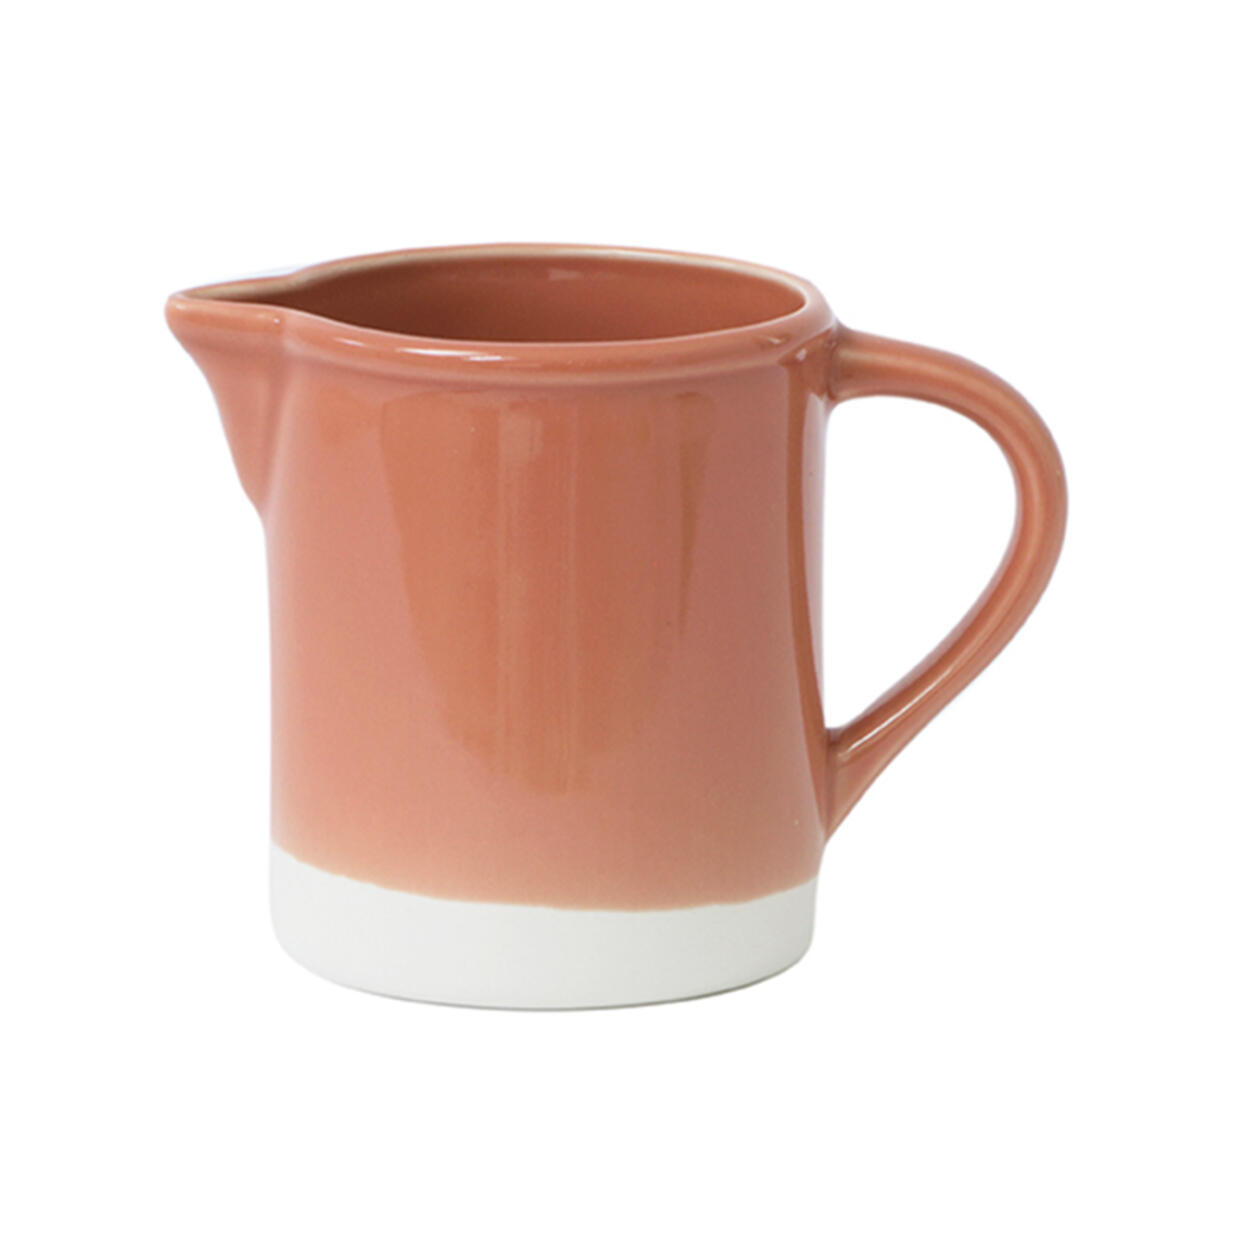 Pitcher L Cantine terre cuite, buy French handmade ceramics online